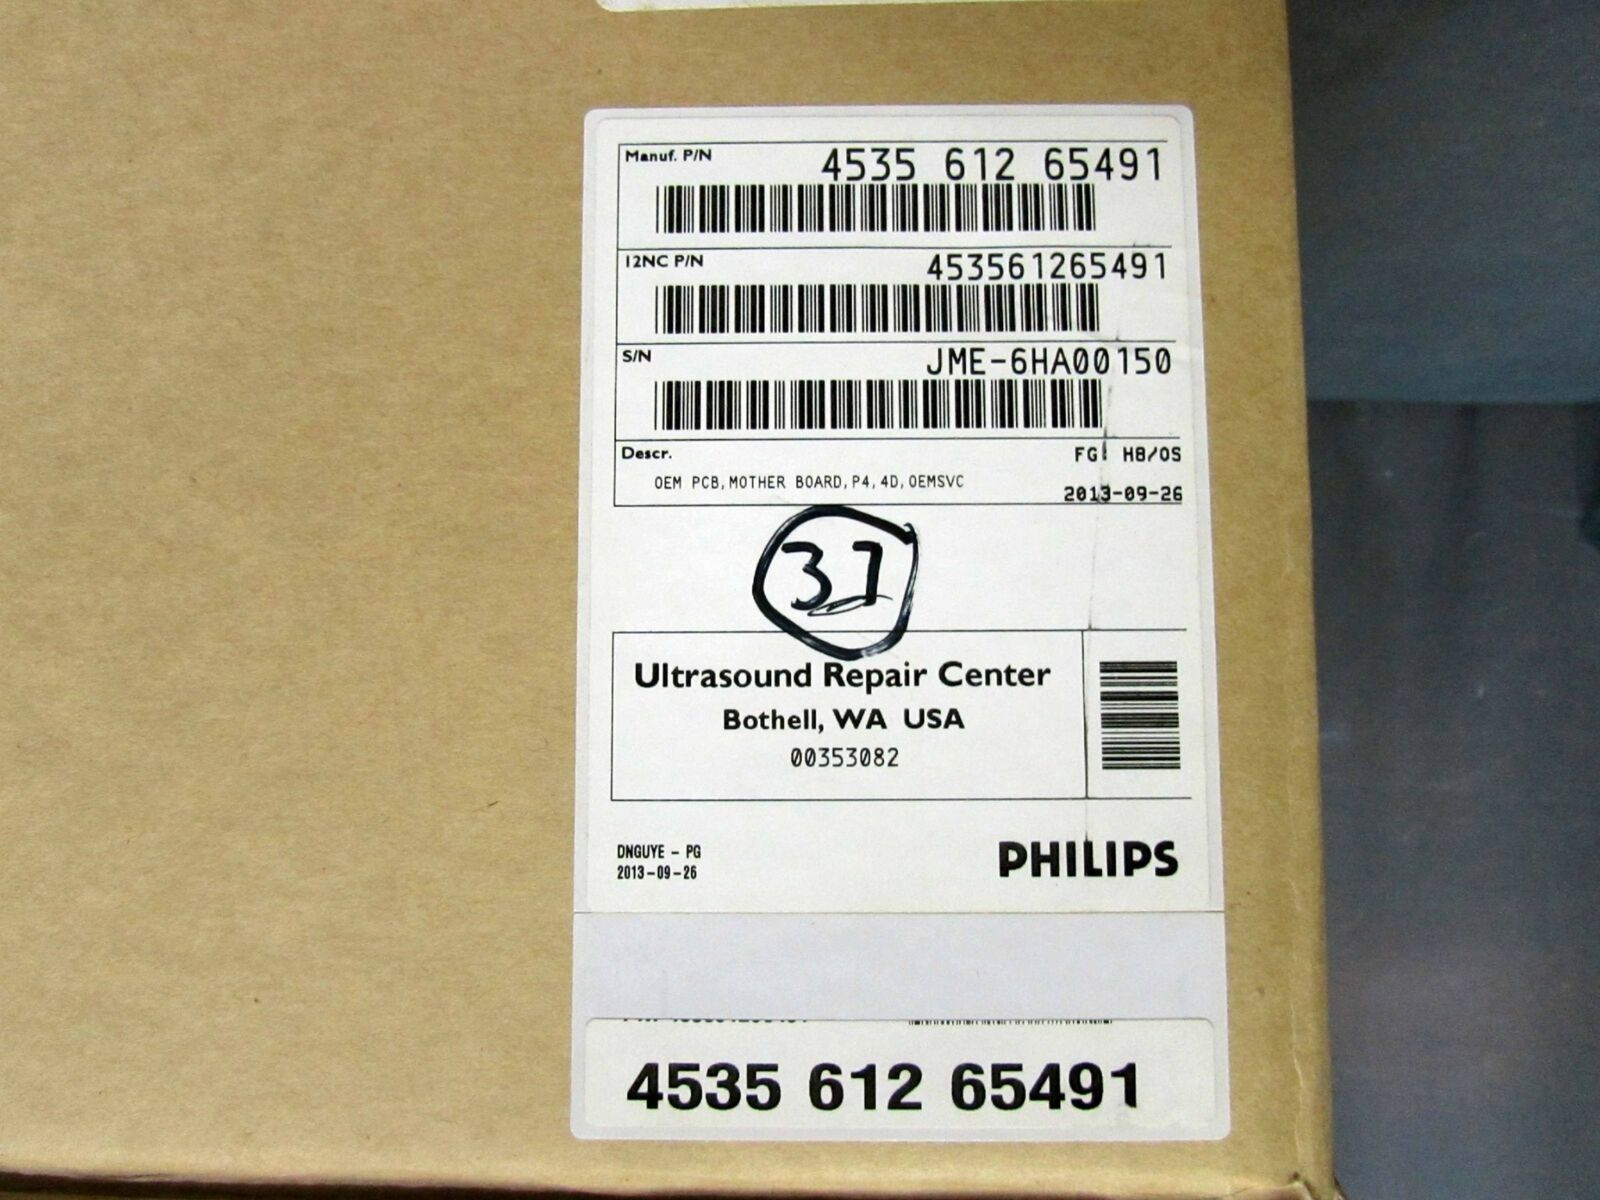 * NEW PHILIPS/ATL HDI 4000 ULTRASOUND MOTHERBOARD 4535-612-65491 DIAGNOSTIC ULTRASOUND MACHINES FOR SALE